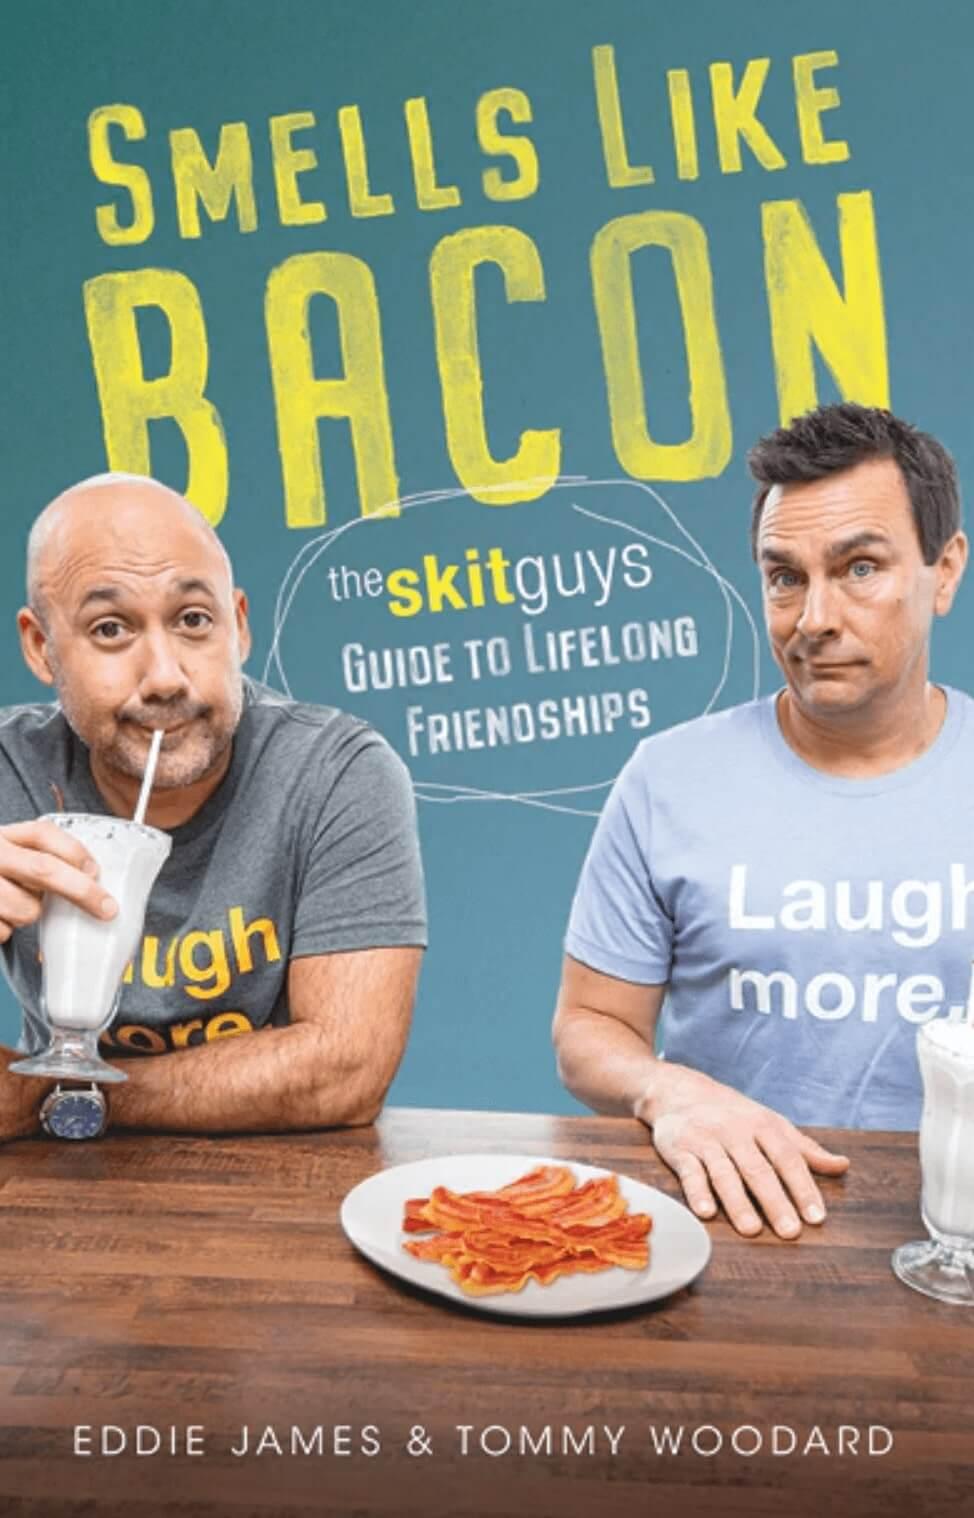 Cover of the book "Smells Like Bacon: The Skit Guys Guide to Lifelong Friendships"